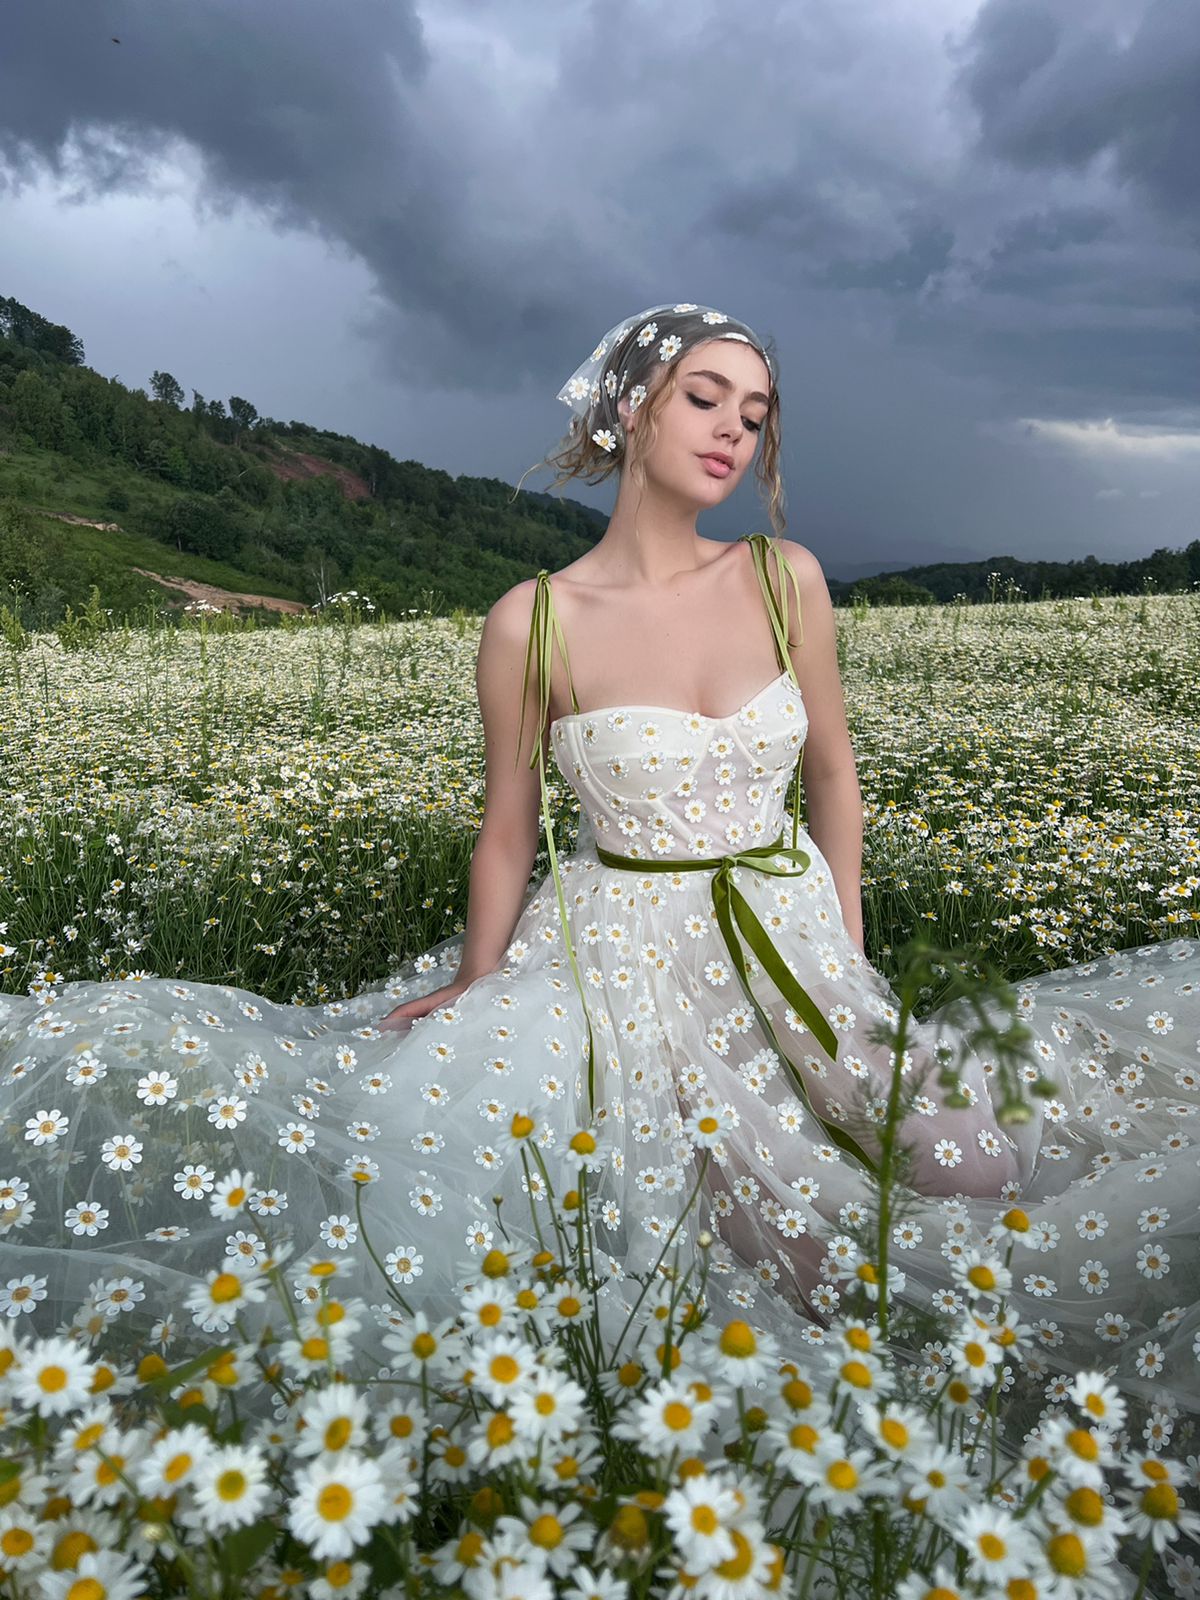 A Line white bridal dress with daisies, straps and scarf